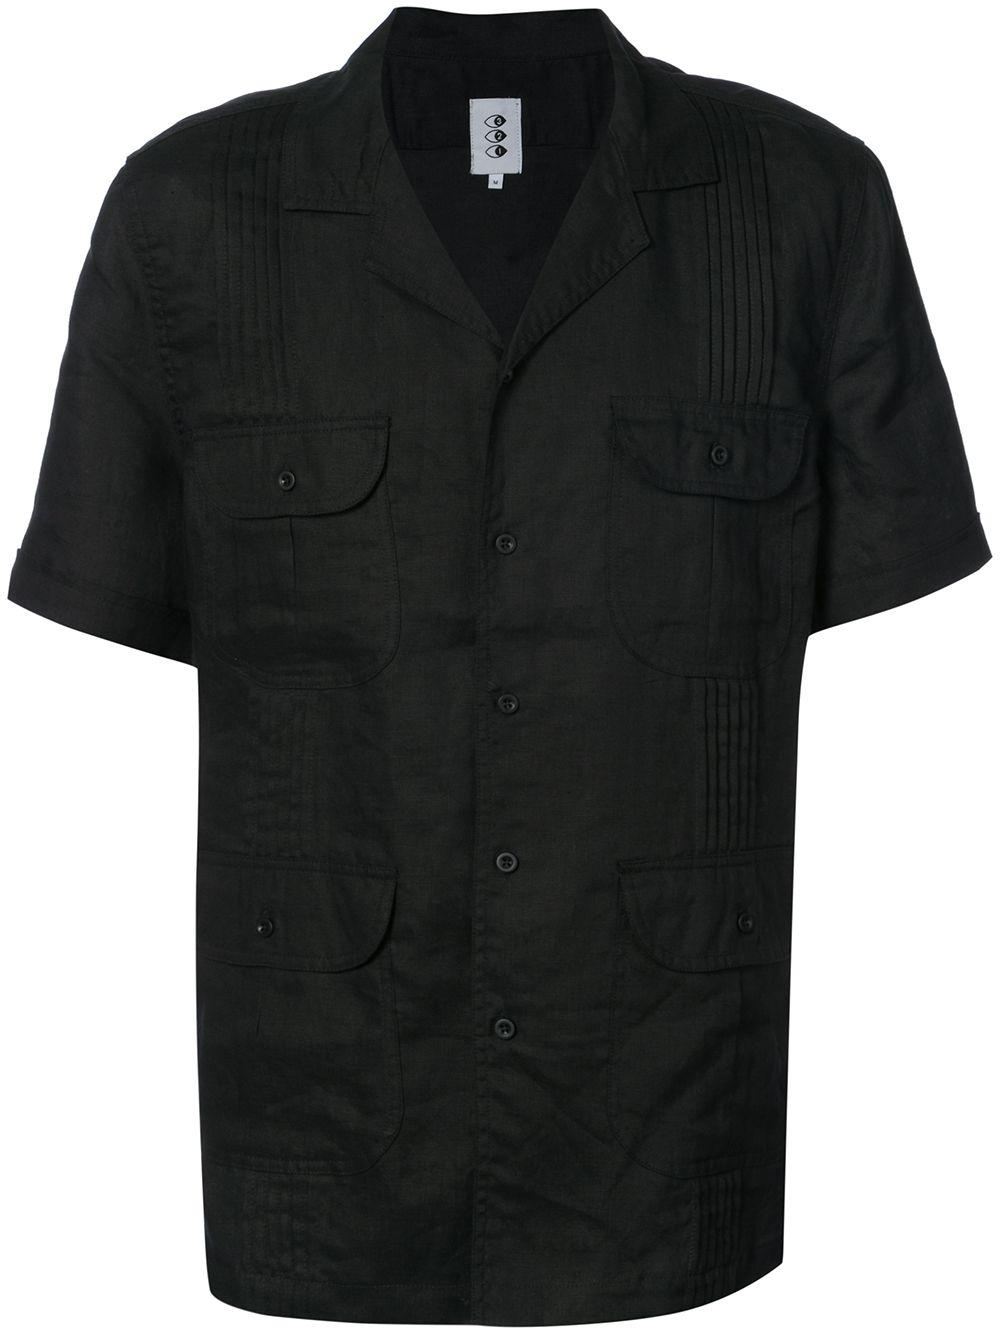 pleat-detailing short-sleeve shirt by 321